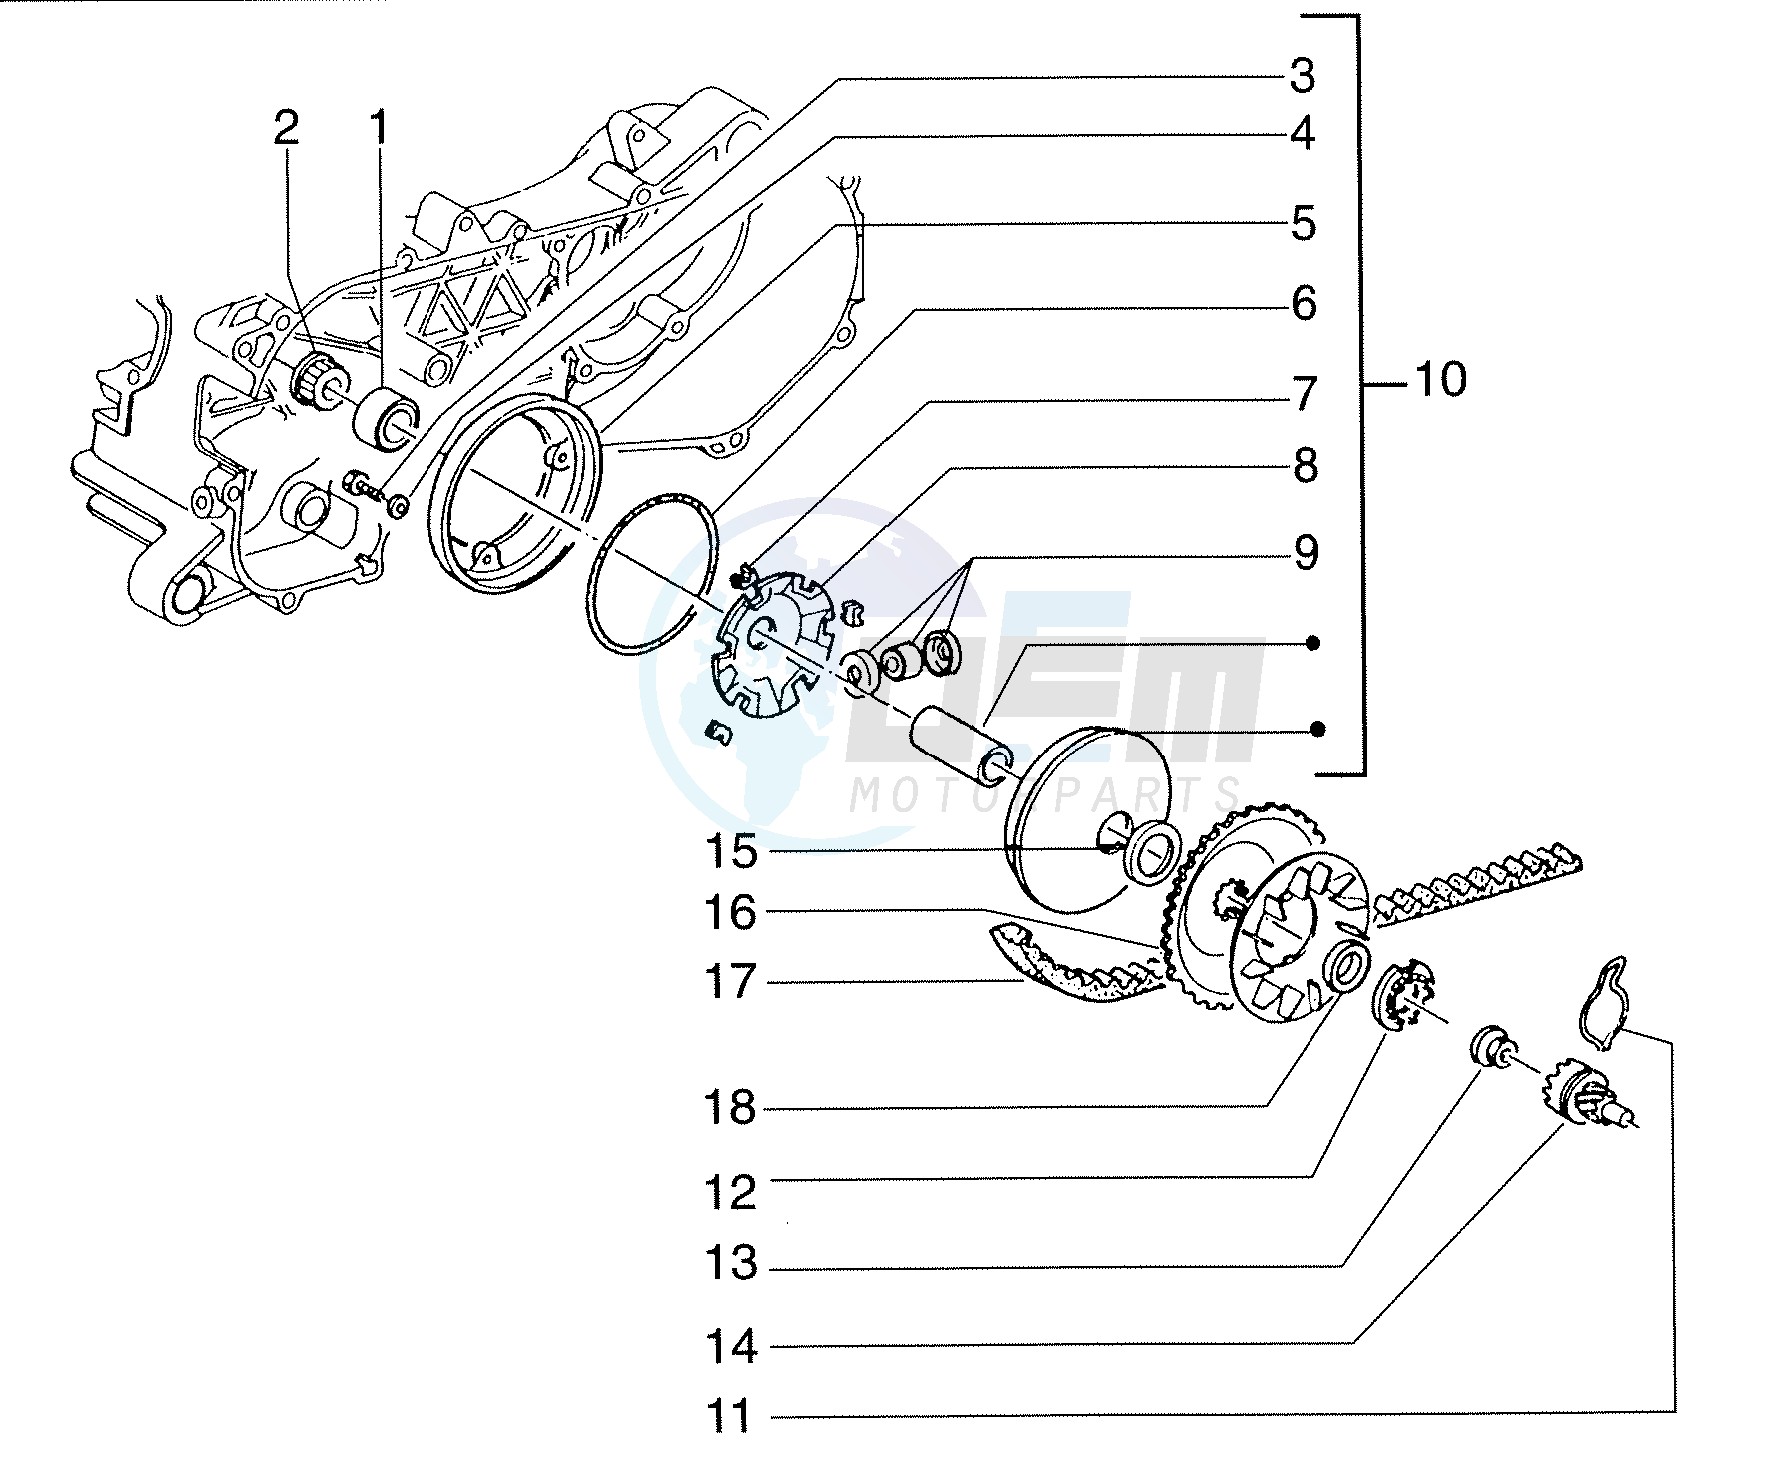 Half-pulley assy. driving image